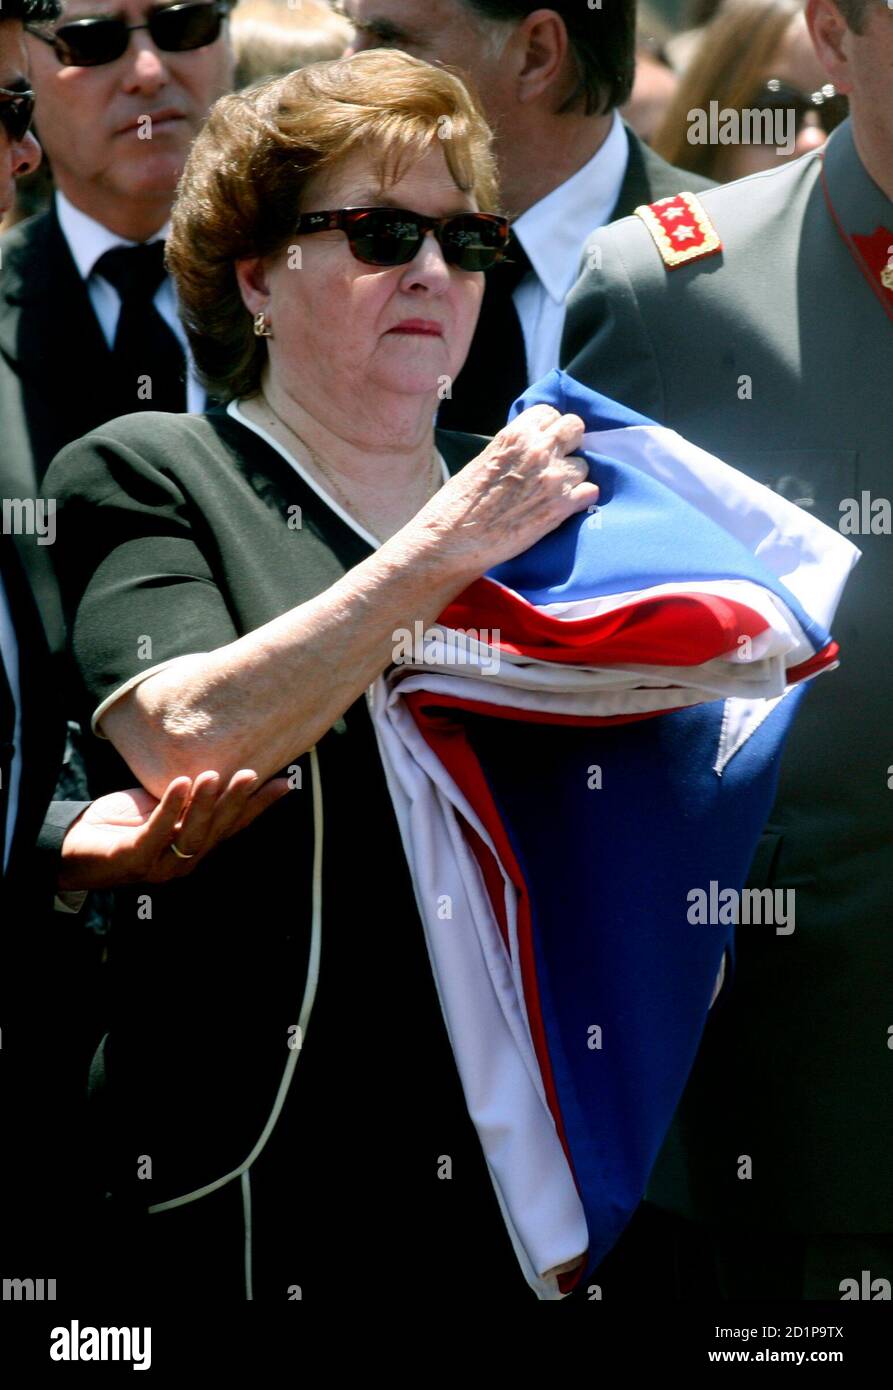 lucia-hiriart-widow-of-former-chilean-dictator-augusto-pinochet-holds-the-flag-that-draped-her-husbands-coffin-at-the-end-of-his-funeral-mass-in-the-courtyard-of-the-military-college-in-santiago-december-12-2006-reuters-victor-ruiz-caballero-chile-2d1p9tx.jpg